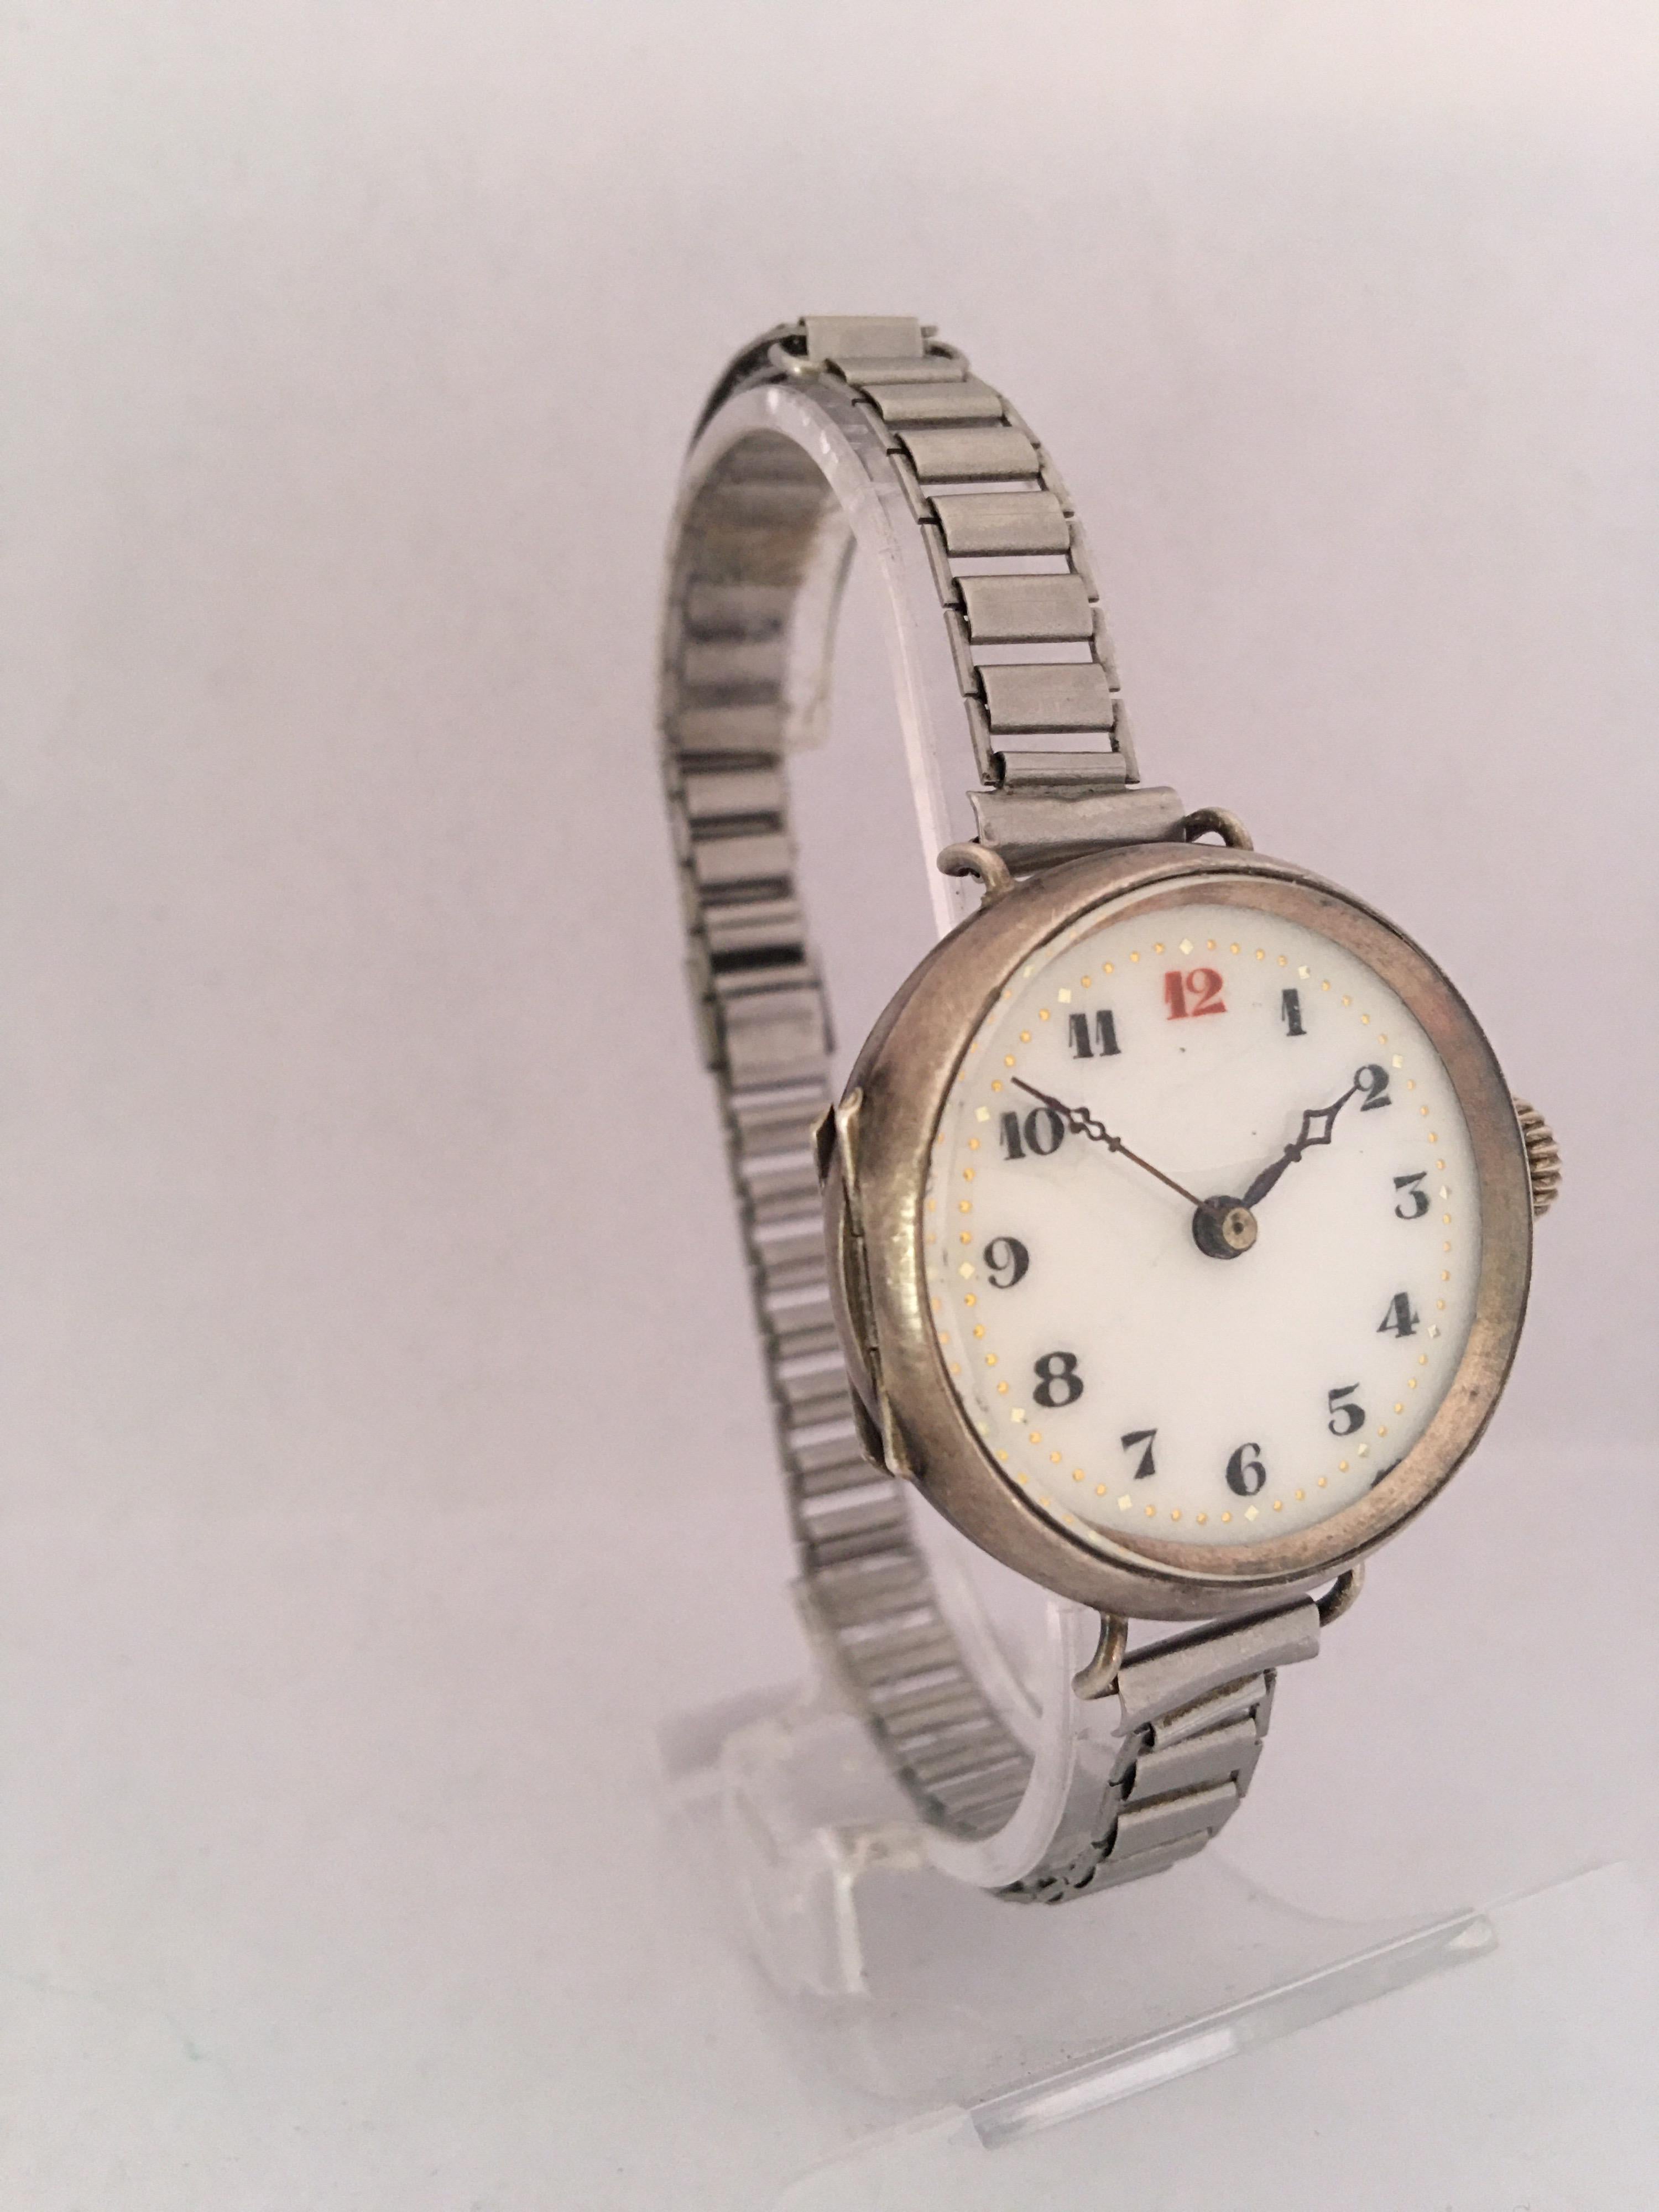 This beautiful antique hand winding silver pin set ladies trench watch is in good working condition and it is ticking well. Visible signs of ageing and wear with light marks on the glass and on the watch case as shown. A few hairline cracks across